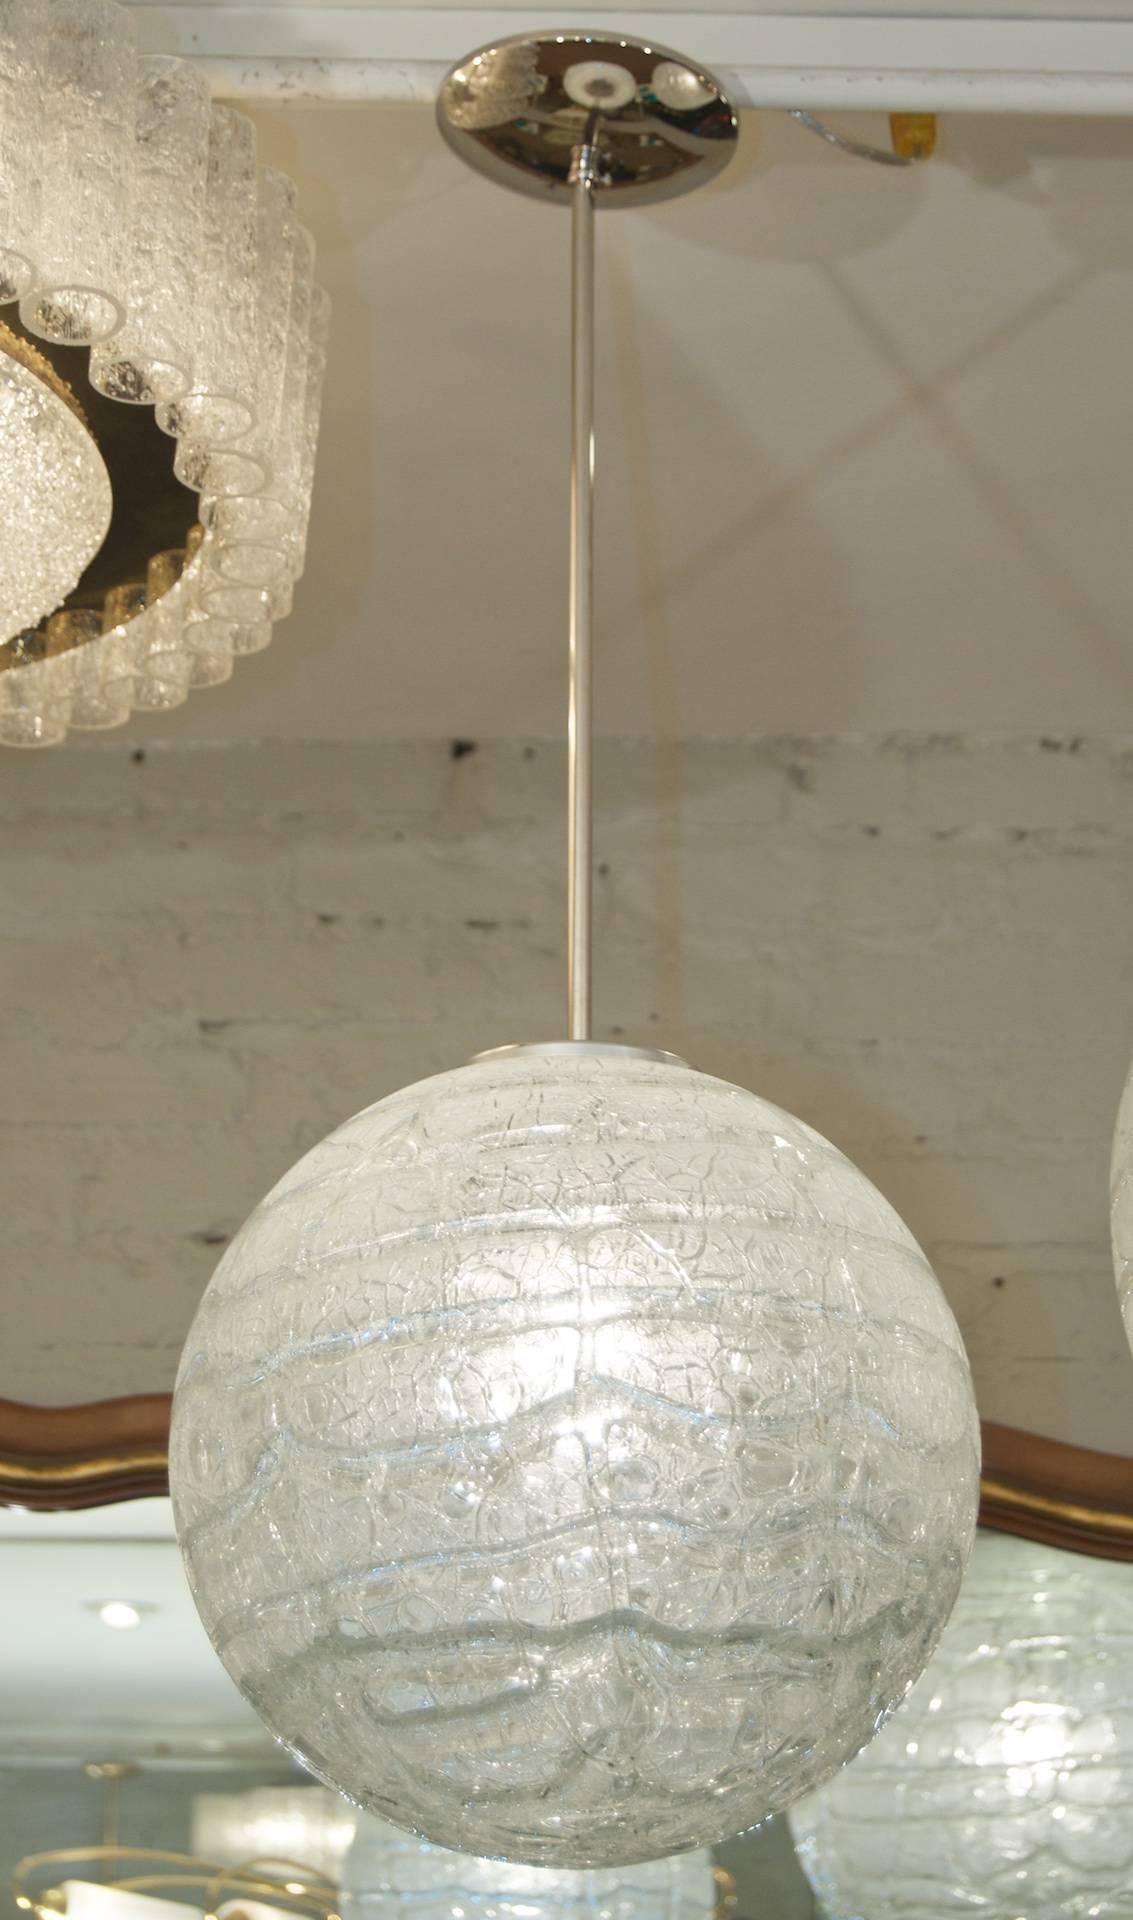 Doria pendant will complement all decors. Heavy textured wave surface glass with crackling and bubbling variegated textures.

Takes a single medium base bulb up to 100 watts, new wiring. Length of drop rod can be adjusted, height listed is of